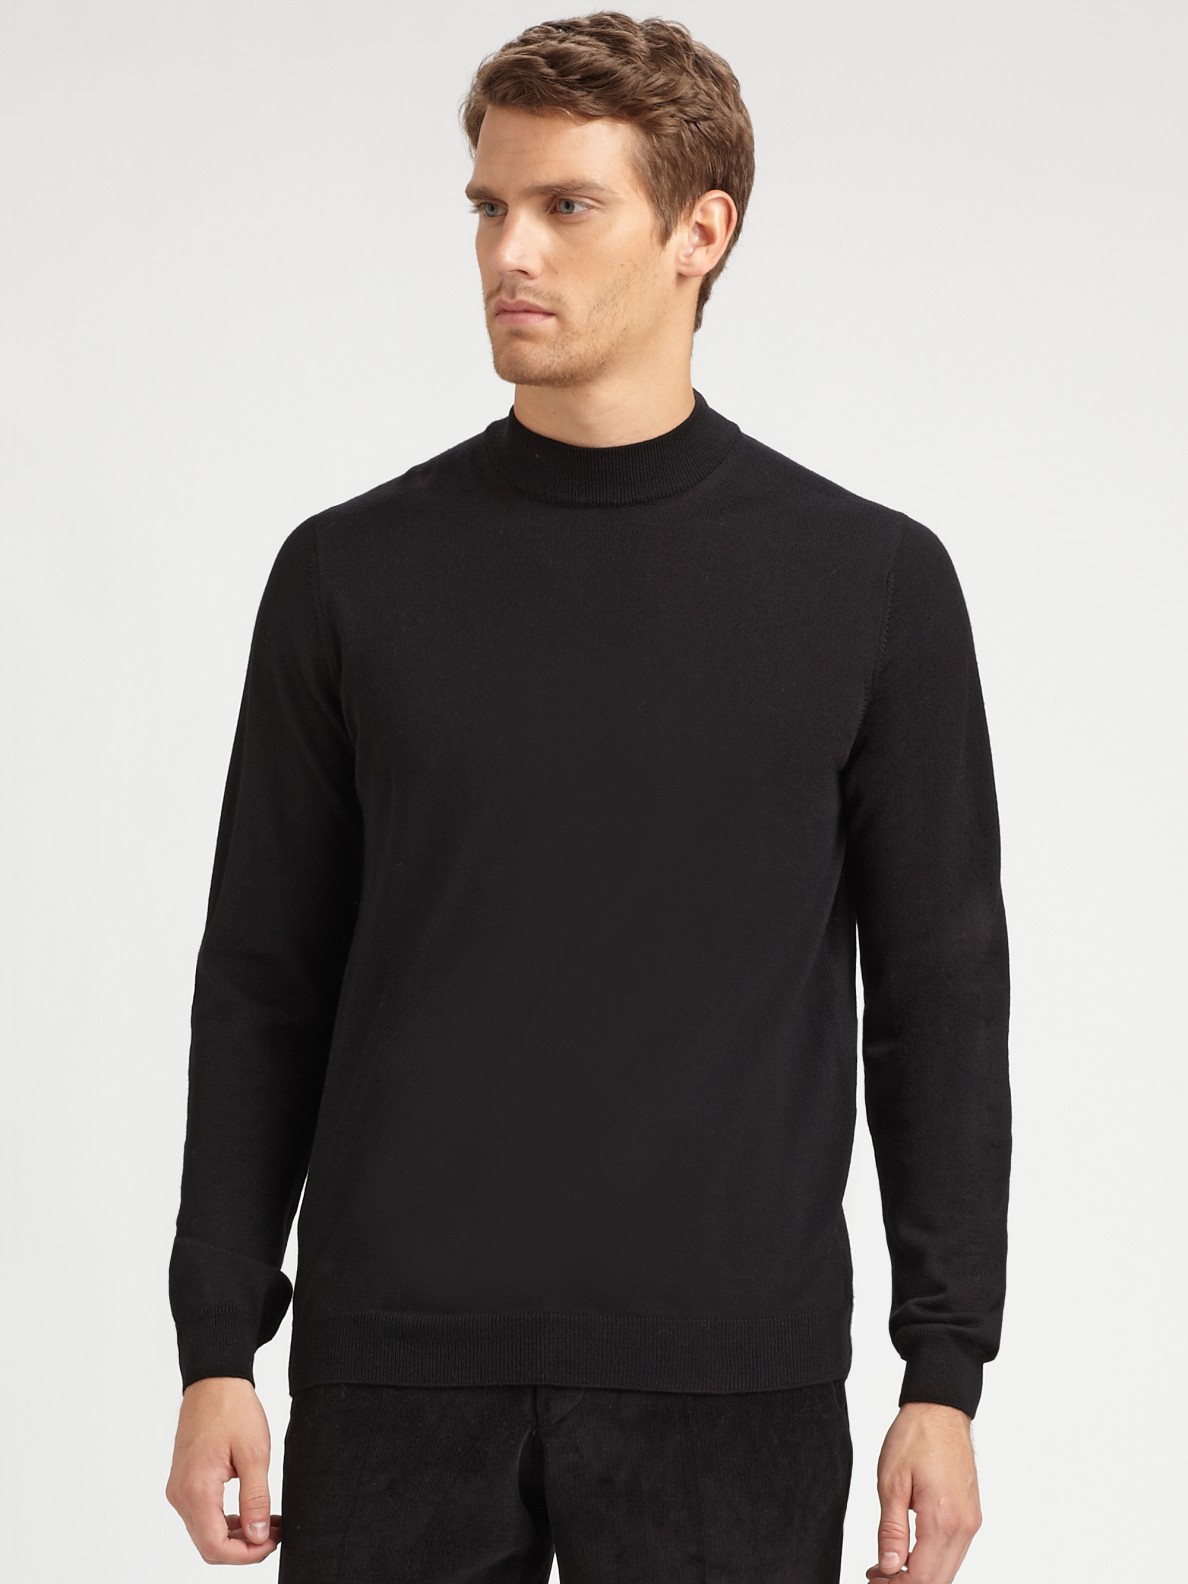 mens mock neck sweaters for sale